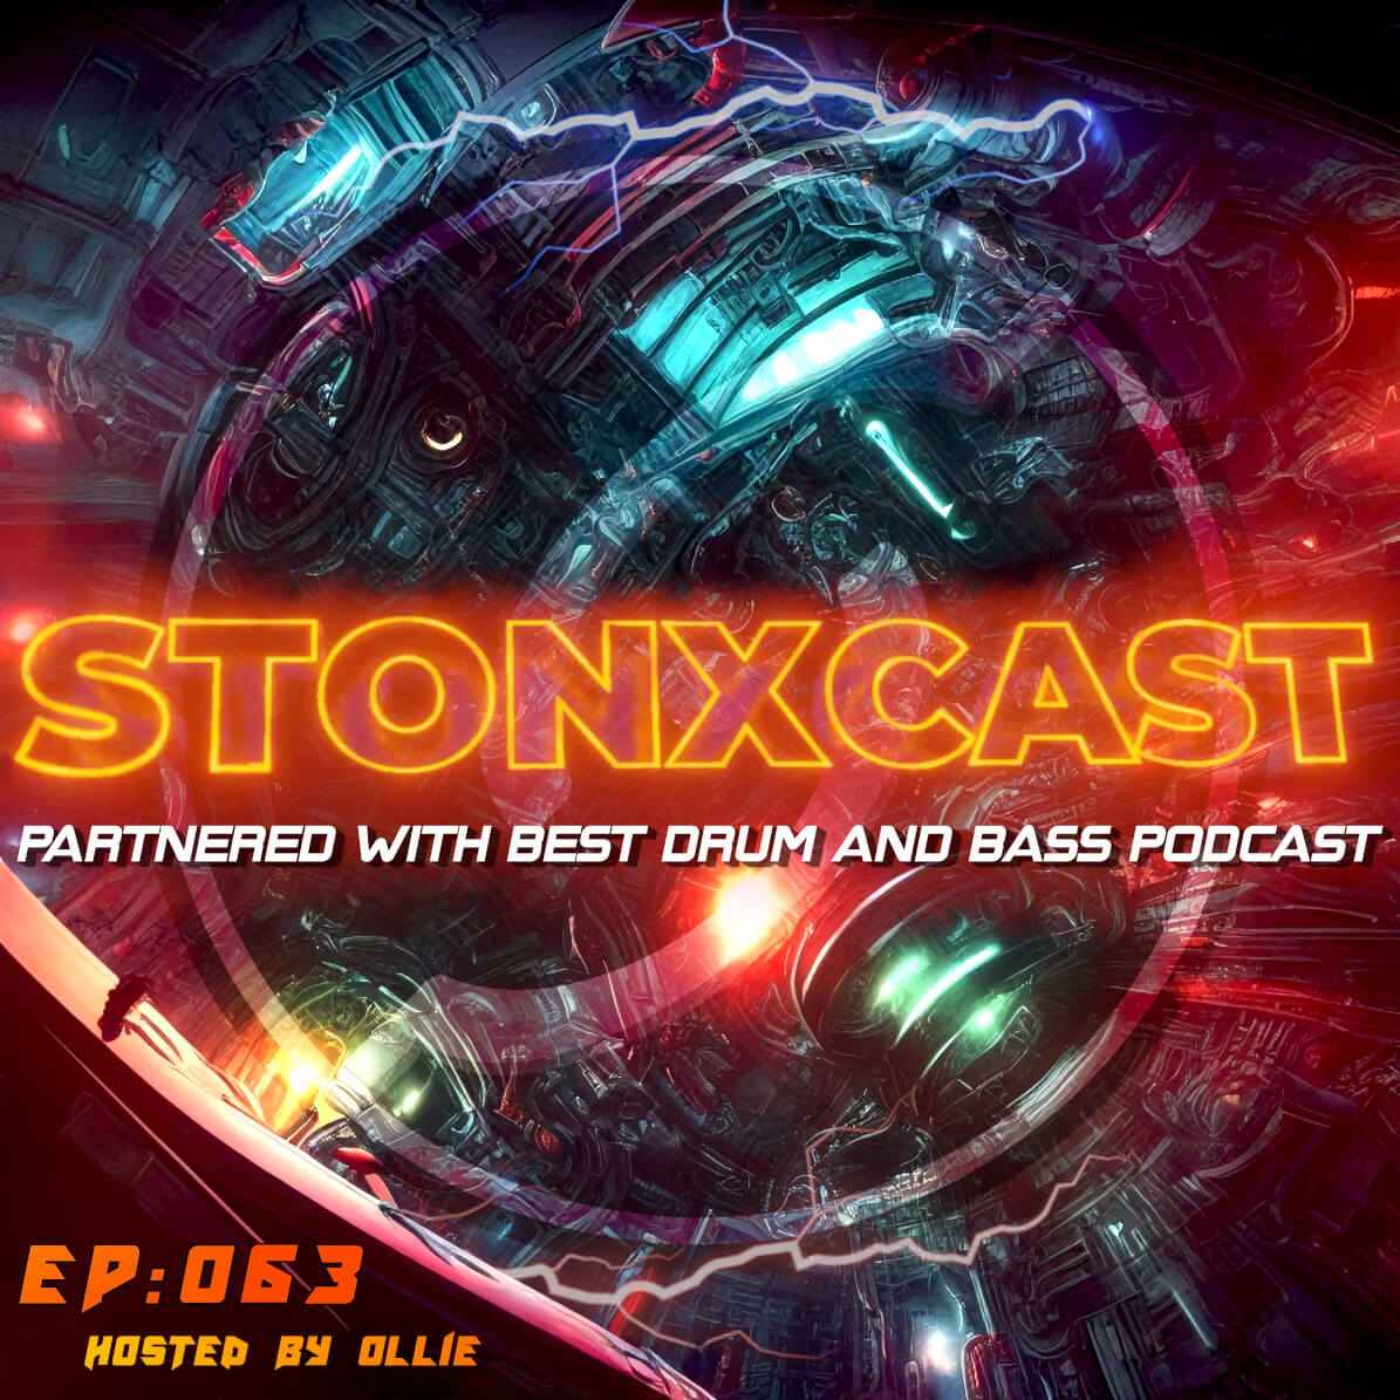 Stonxcast EP:063 - Hosted by Ollie Artwork